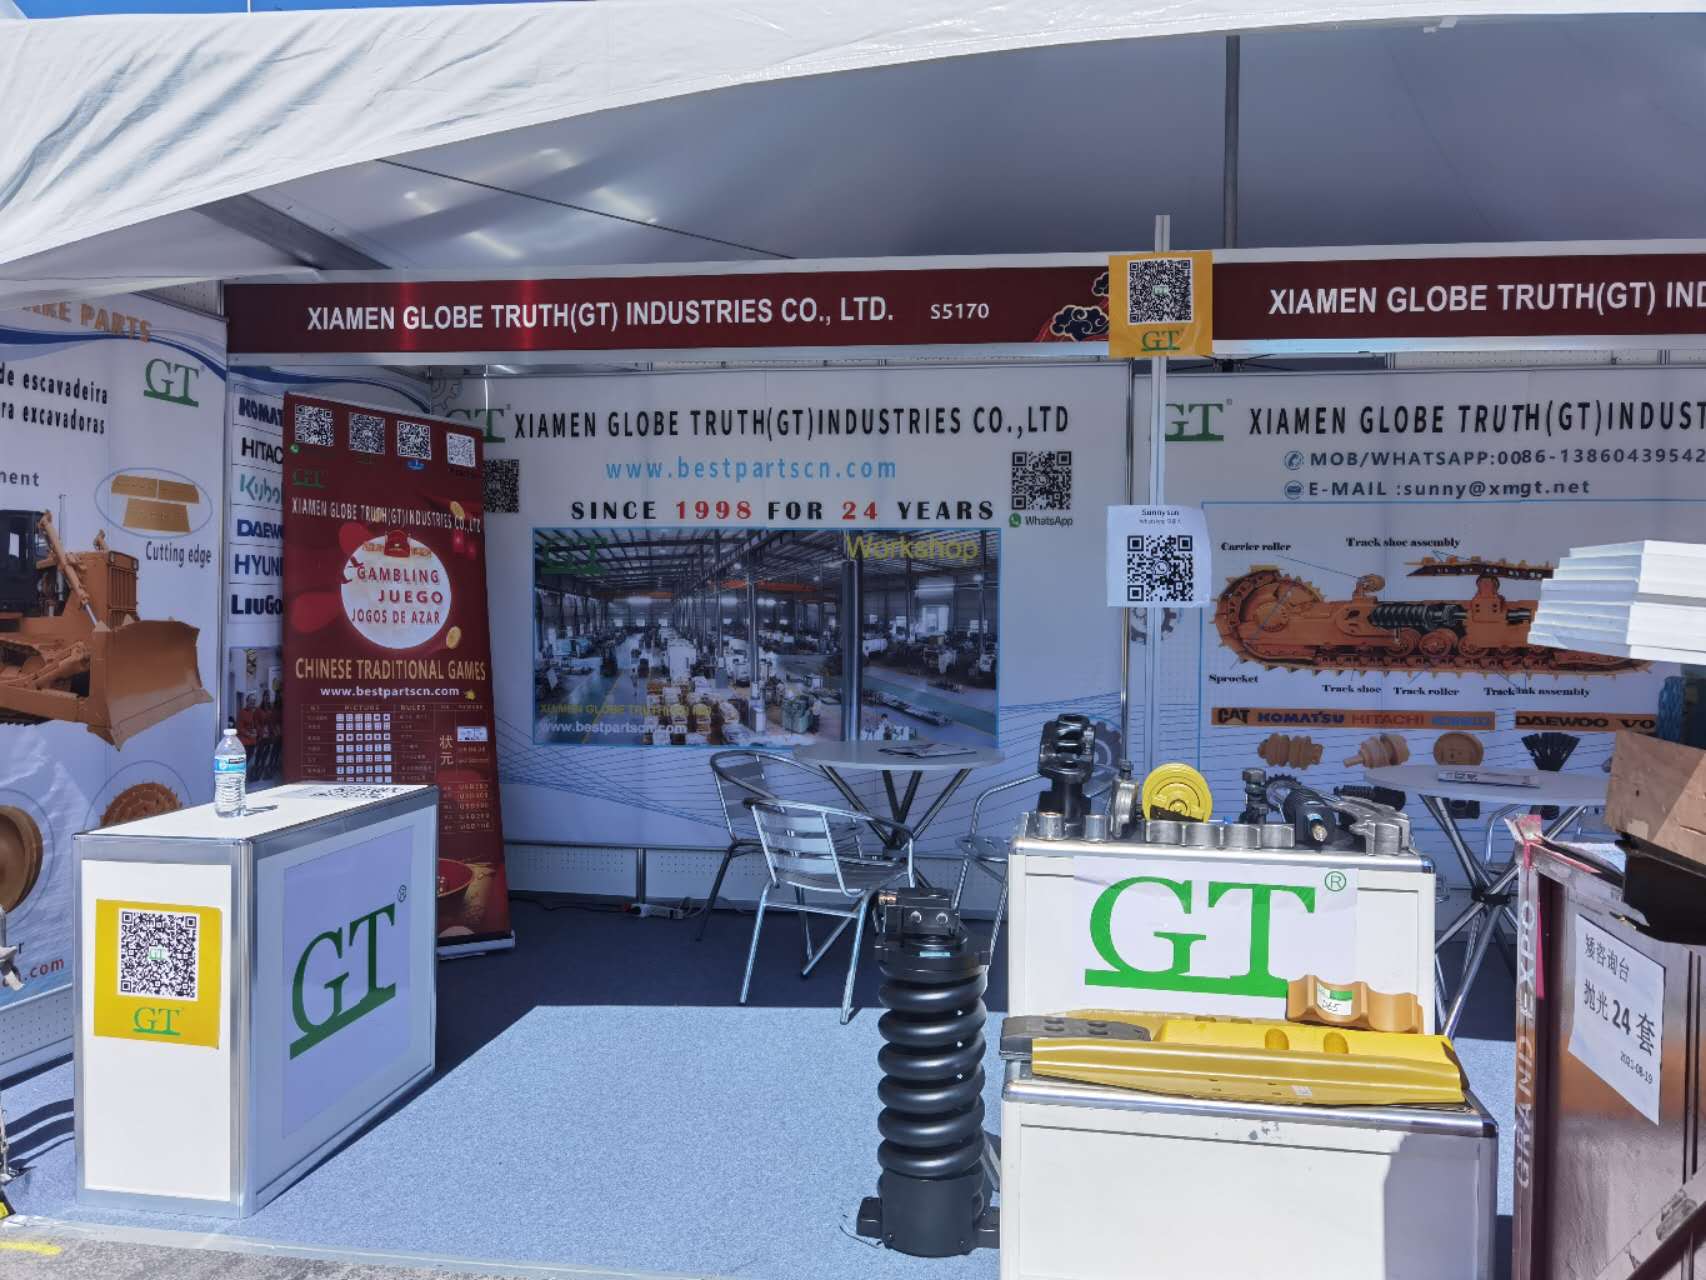 Welcome to visit us at S5170 in CONEXPO-CON/AGG 2023 Las Vegas